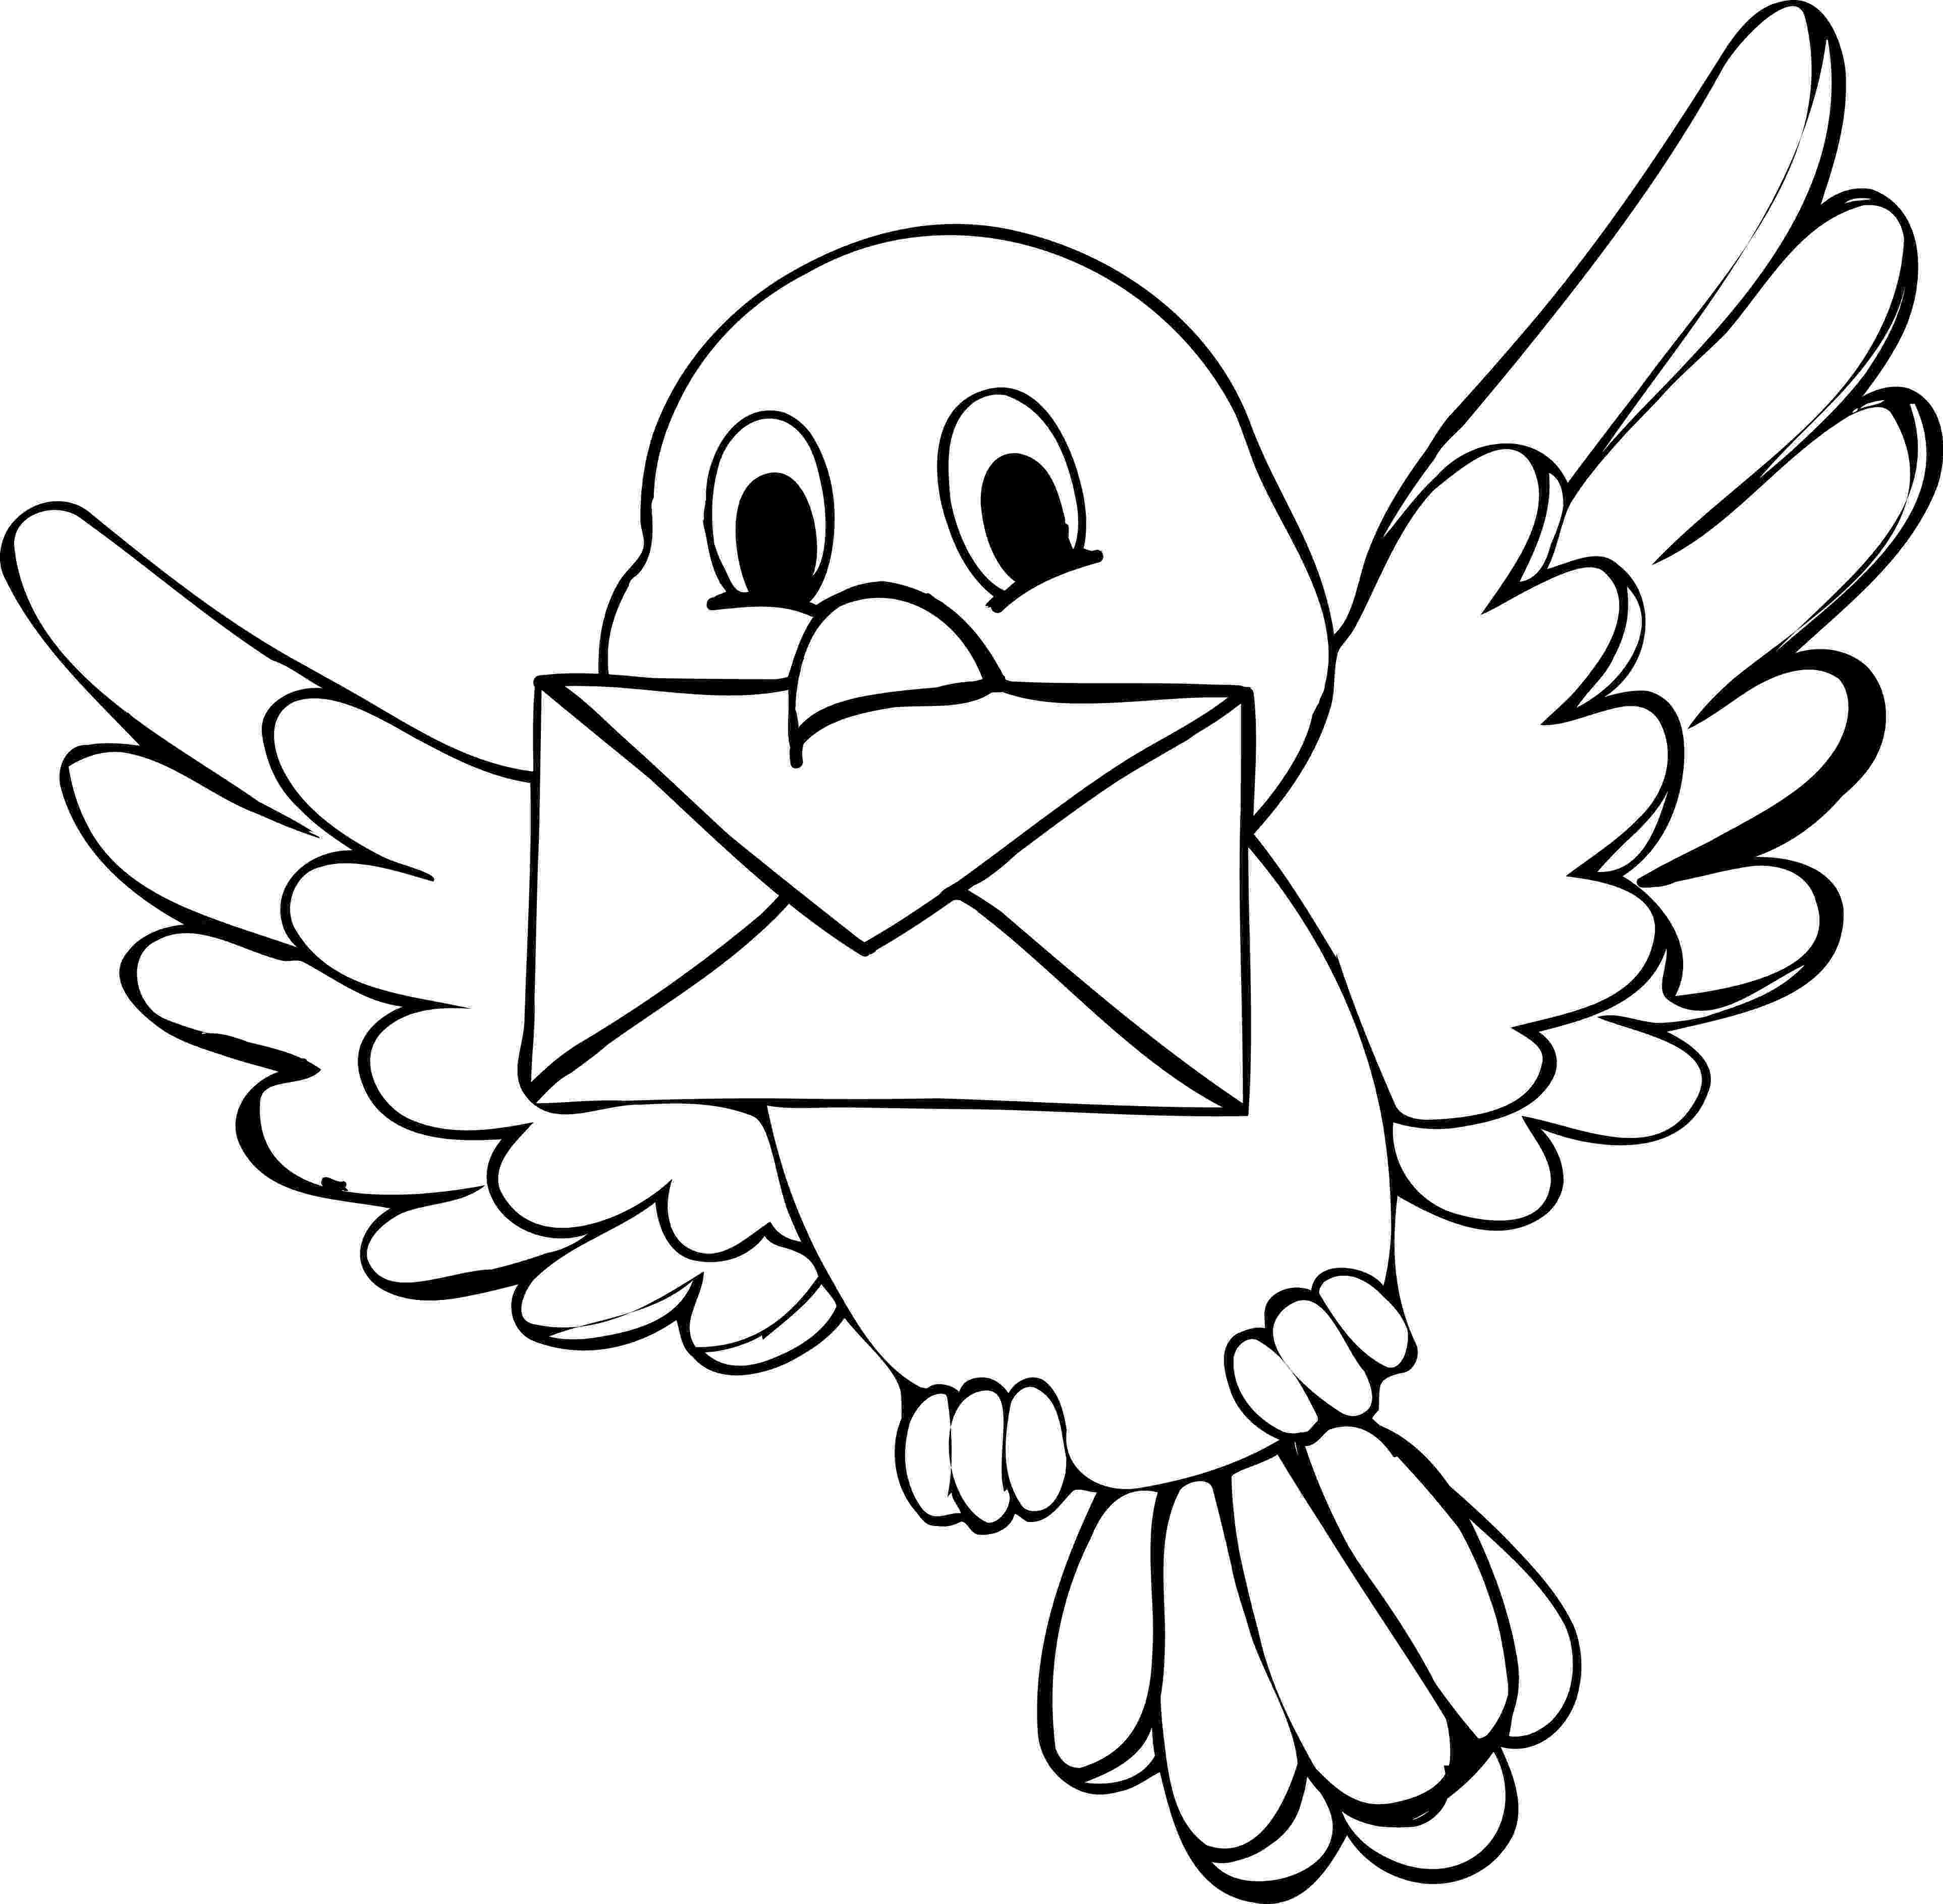 free bird coloring pages cute bird coloring page wecoloringpagecom pages coloring bird free 